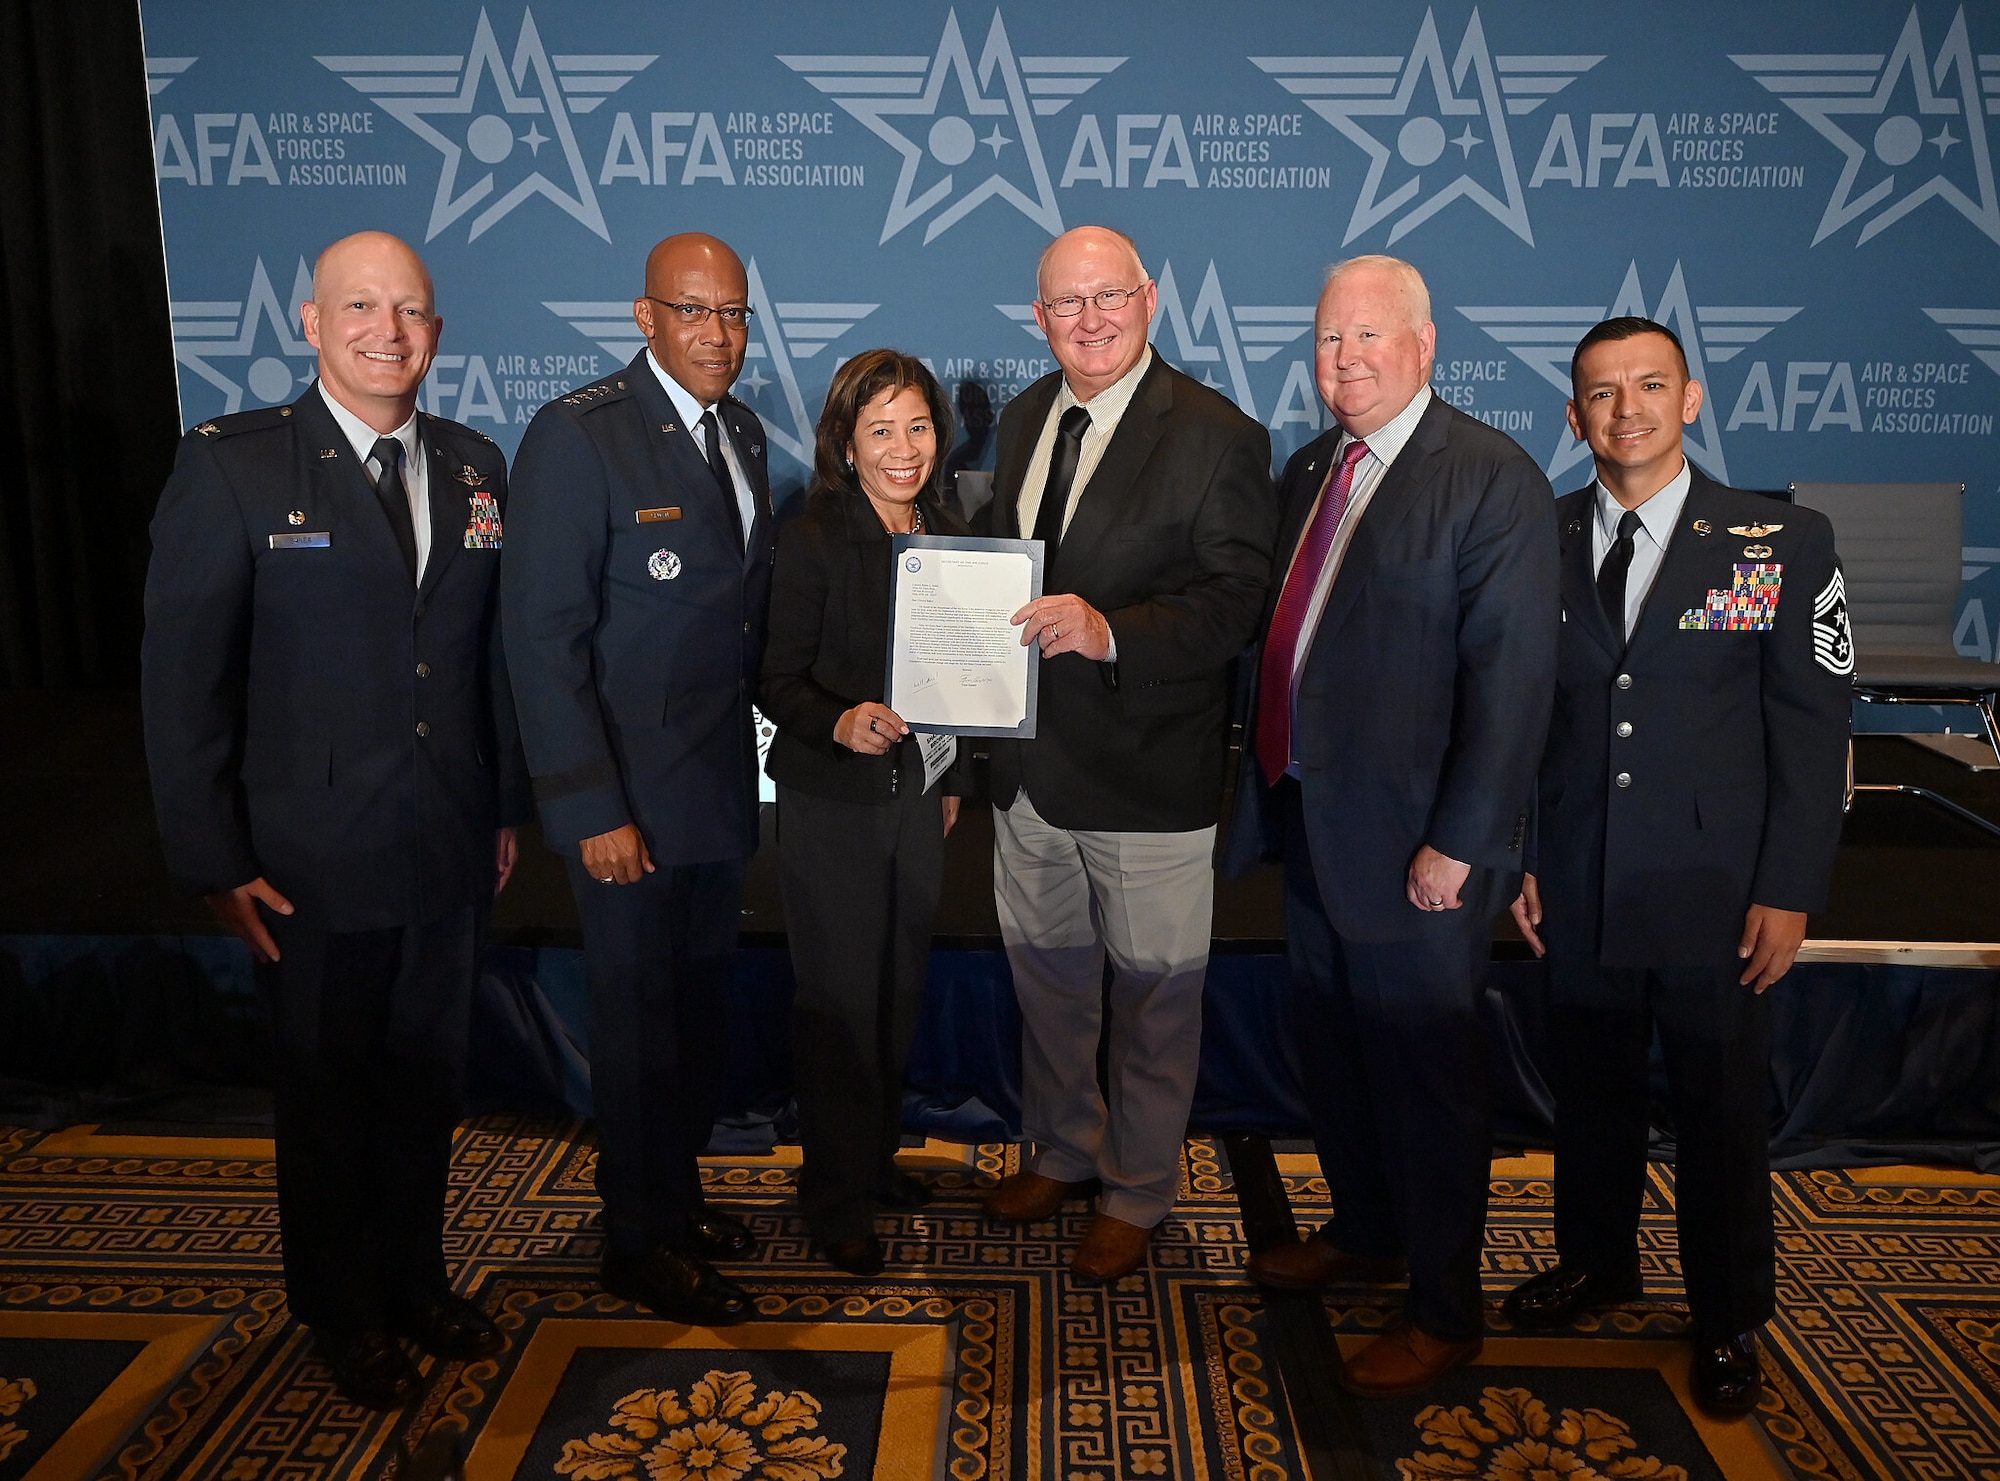 Gen. Charles Q. Brown Jr., (second to the left) former Chief of Staff of the Air Force and his wife, Sharene (middle left), present the Community Partnership letter of excellence to Charles Butchee, the Altus Air Force Base Community Partnership Lead, and Dr. Joe Leverett, Chairman of the Altus Military Affairs Committee (second to the right). Col. Blaine Baker (left), 97th Air Mobility Wing (AMW) commander, also joined to celebrate the award with Chief MSgt. Cesar Flores, 97th AMW command chief. (U.S. Air Force photo courtesy of Staff Sgt. Chad Trujillo)